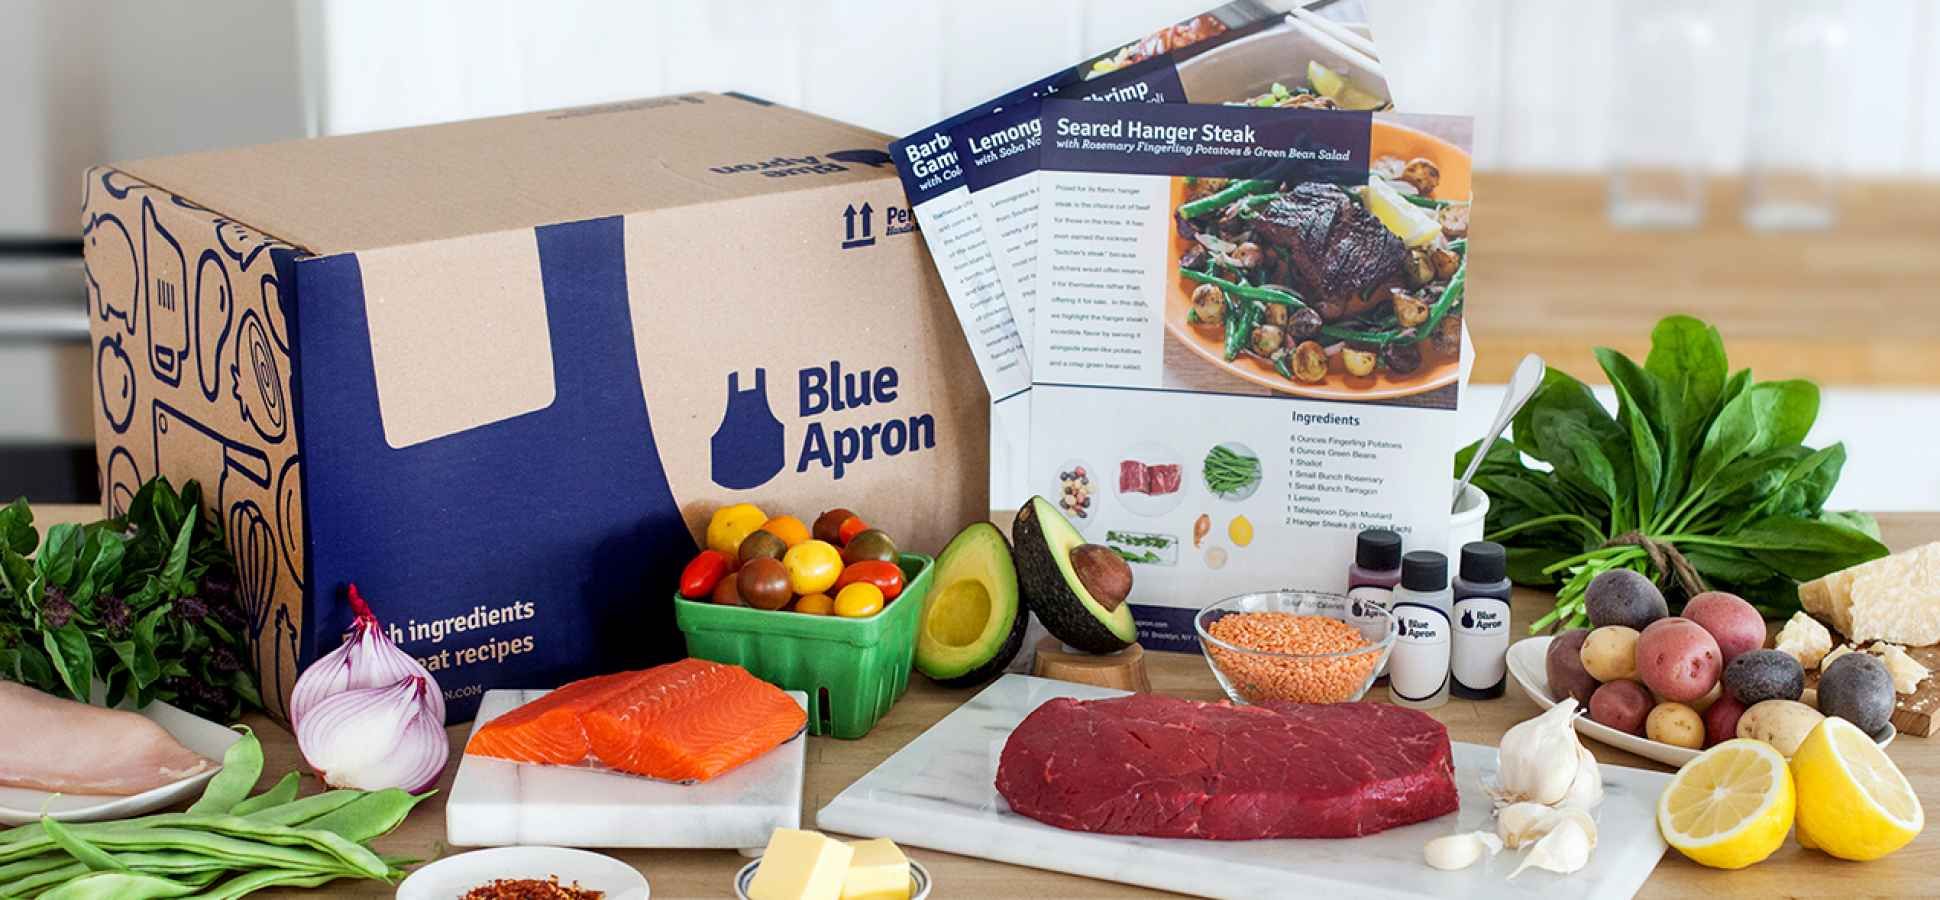 Blue Apron refrigerated boxes used for delivery